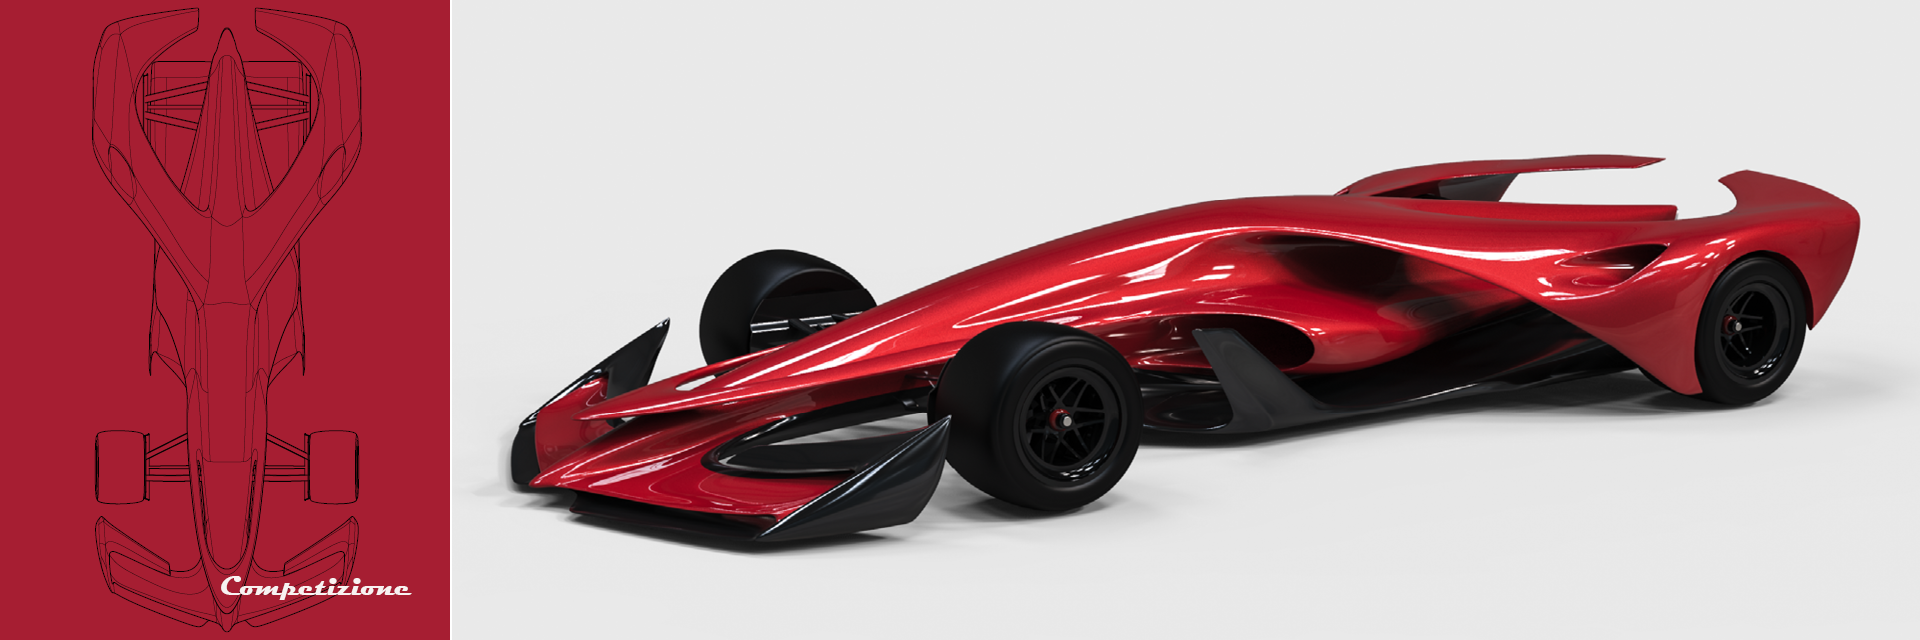 A render and a sketch of a uniquely shaped red racecar. 